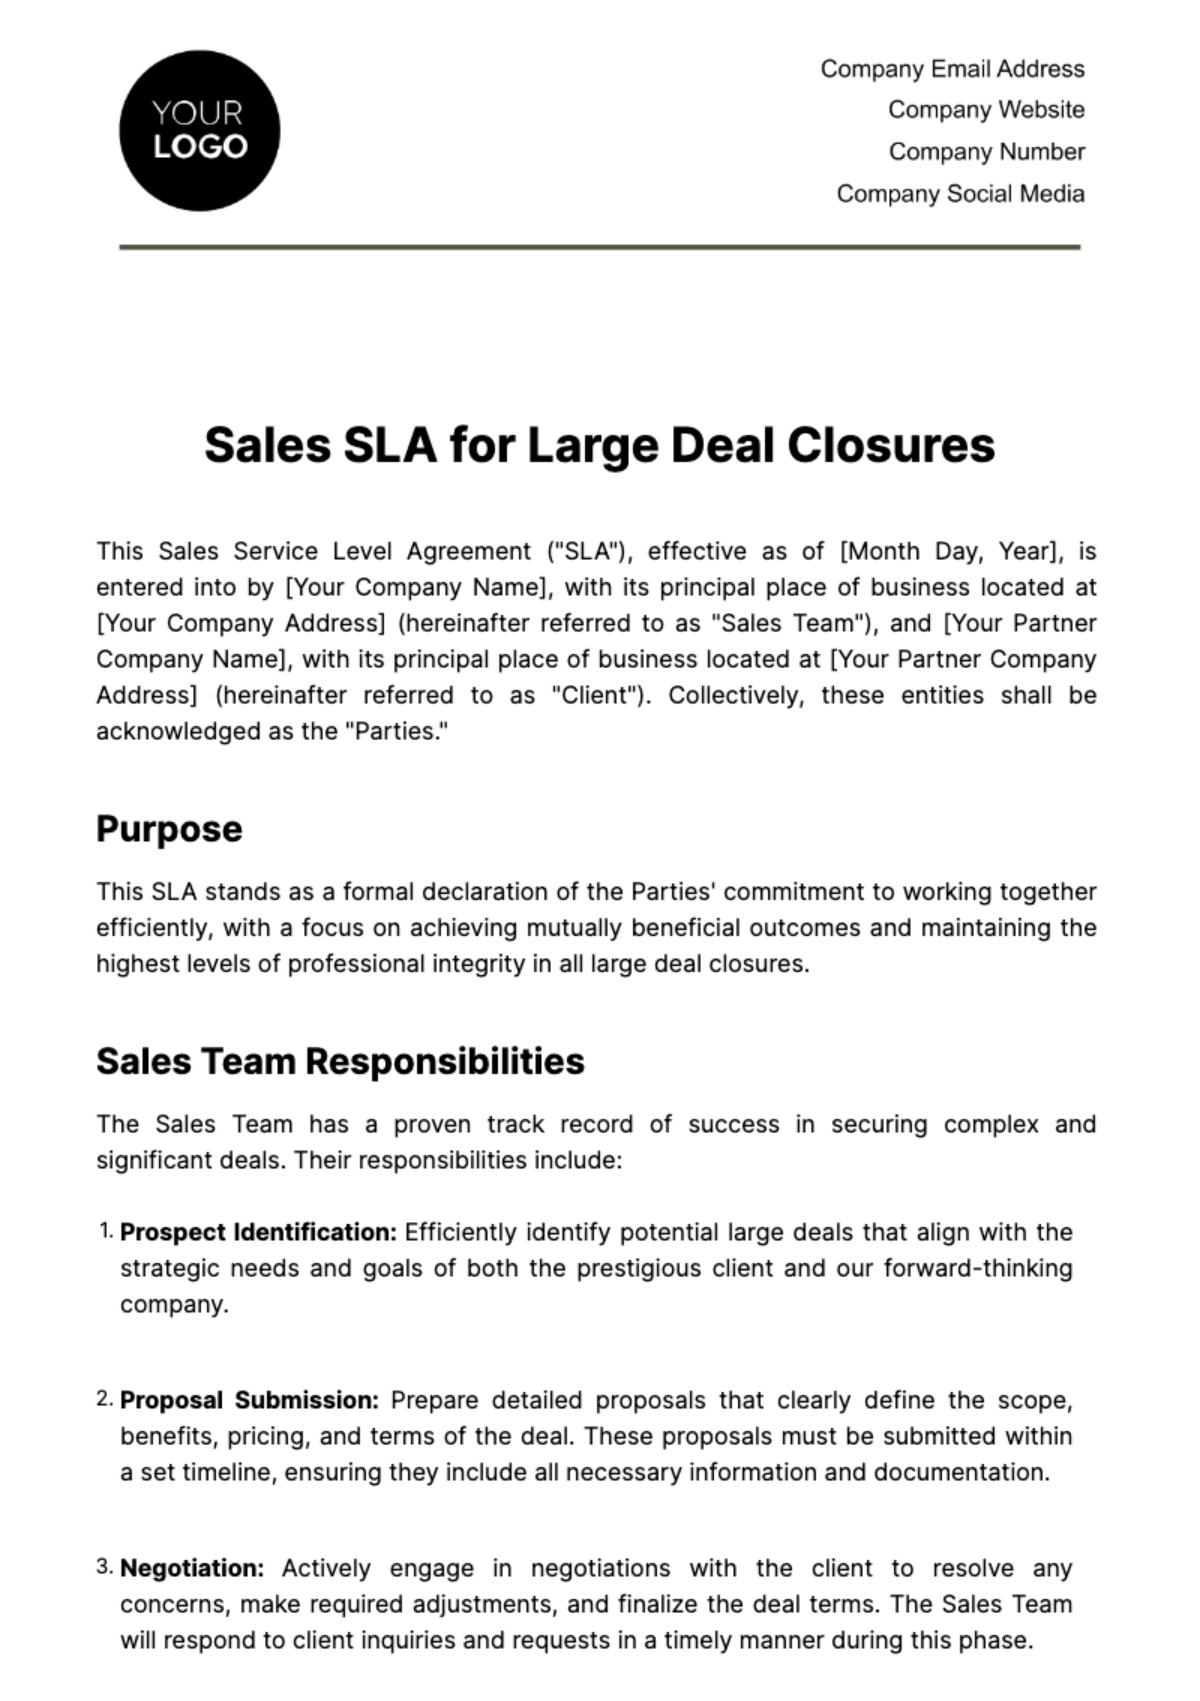 Sales SLA for Large Deal Closures Template